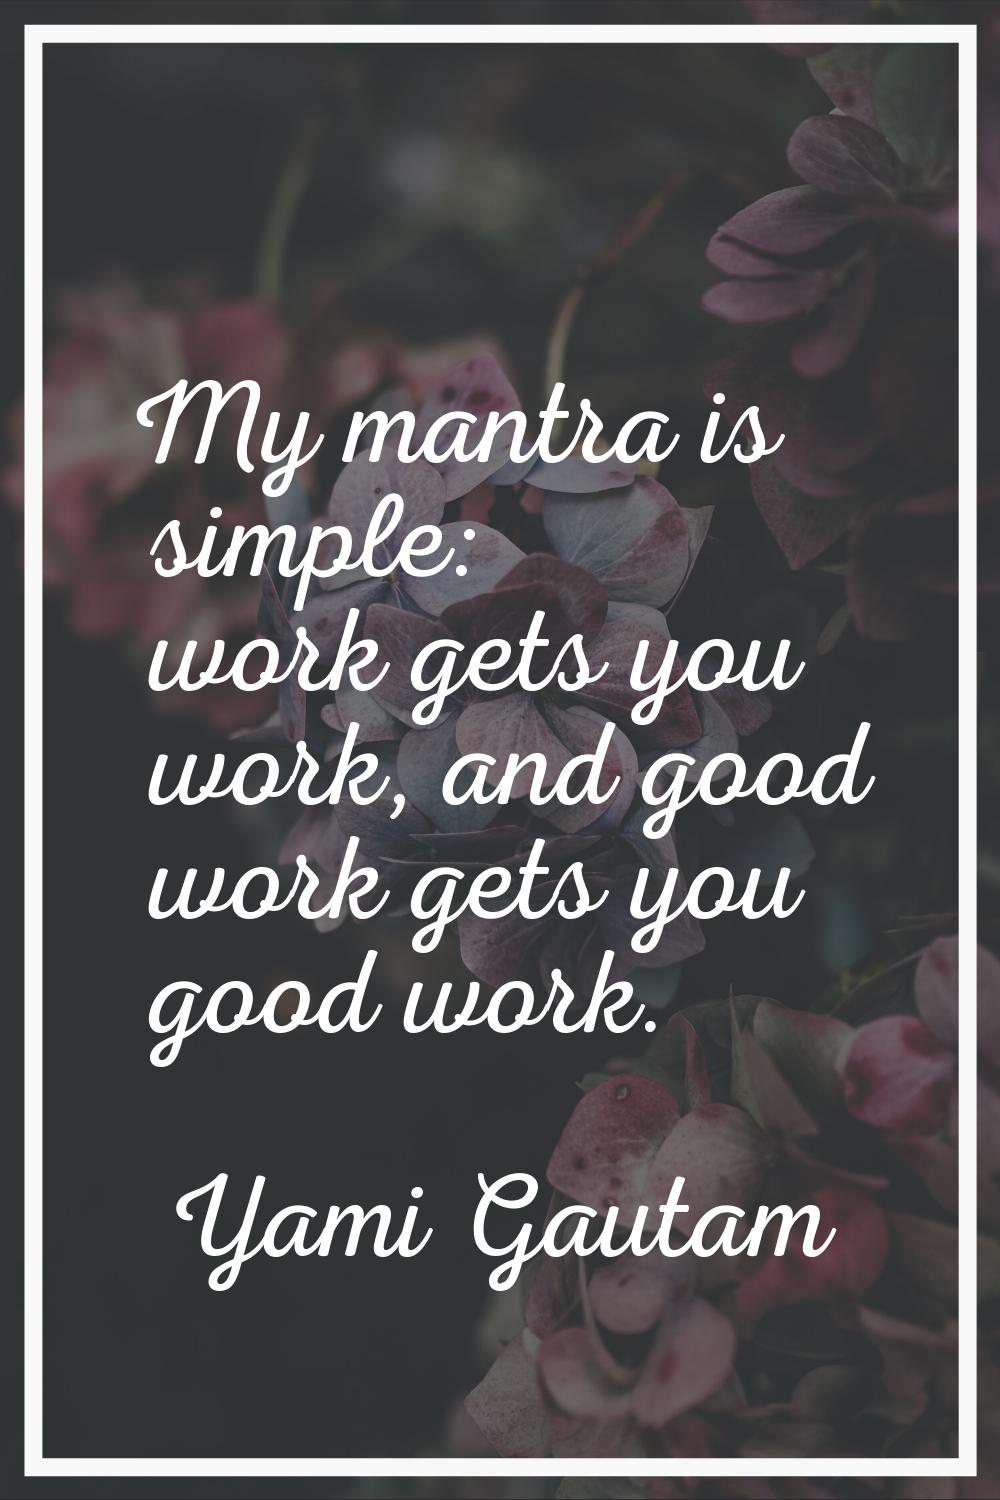 My mantra is simple: work gets you work, and good work gets you good work.